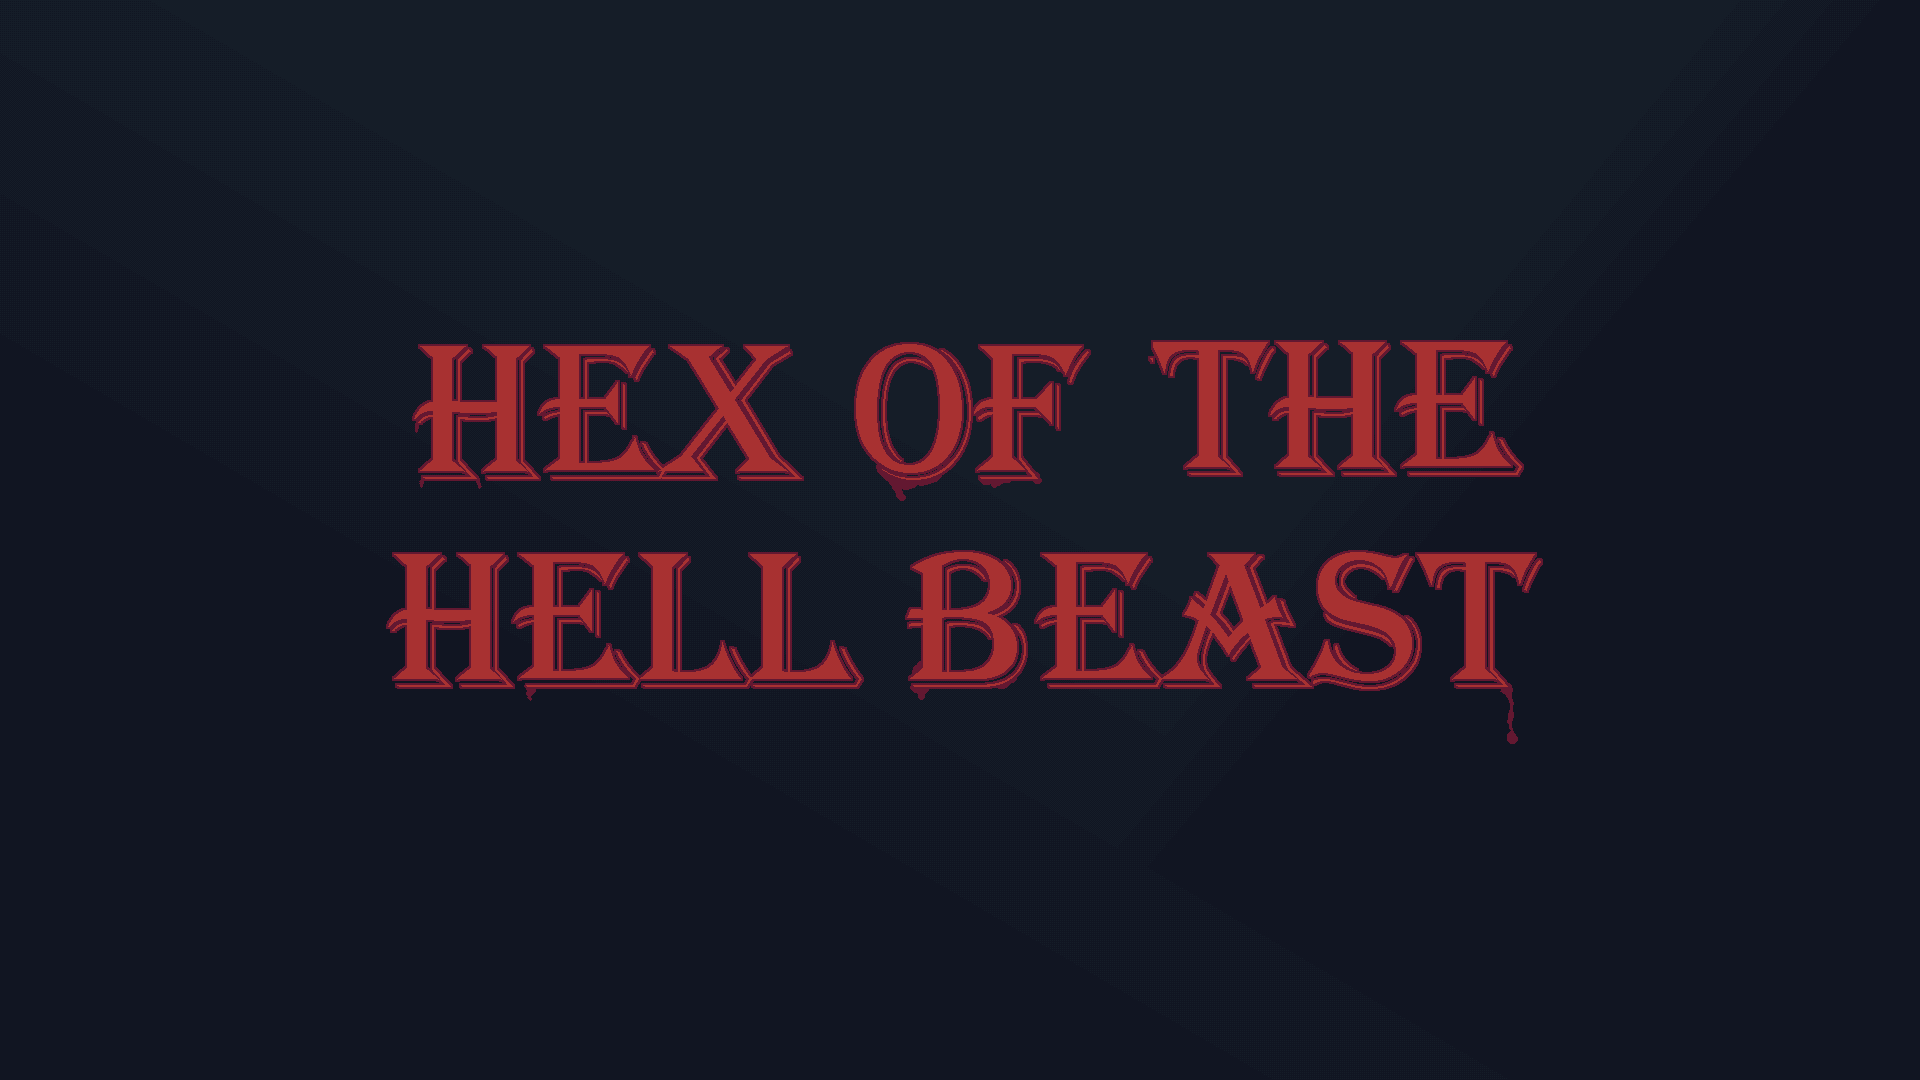 Hex of the Hell Beast